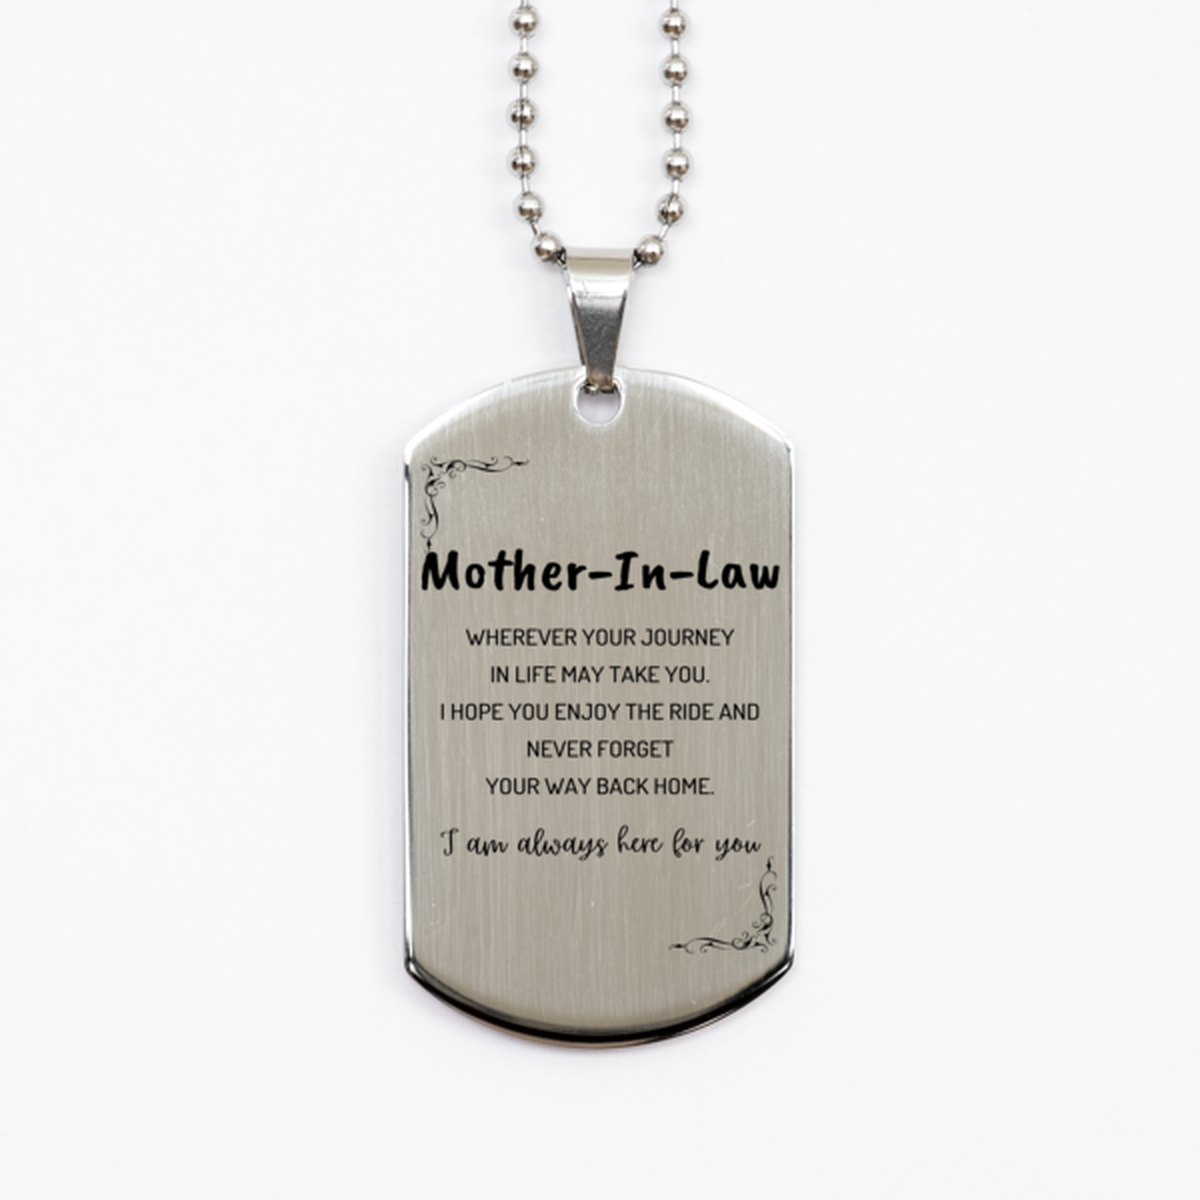 Mother-In-Law wherever your journey in life may take you, I am always here for you Mother-In-Law Silver Dog Tag, Awesome Christmas Gifts For Mother-In-Law, Mother-In-Law Birthday Gifts for Men Women Family Loved One